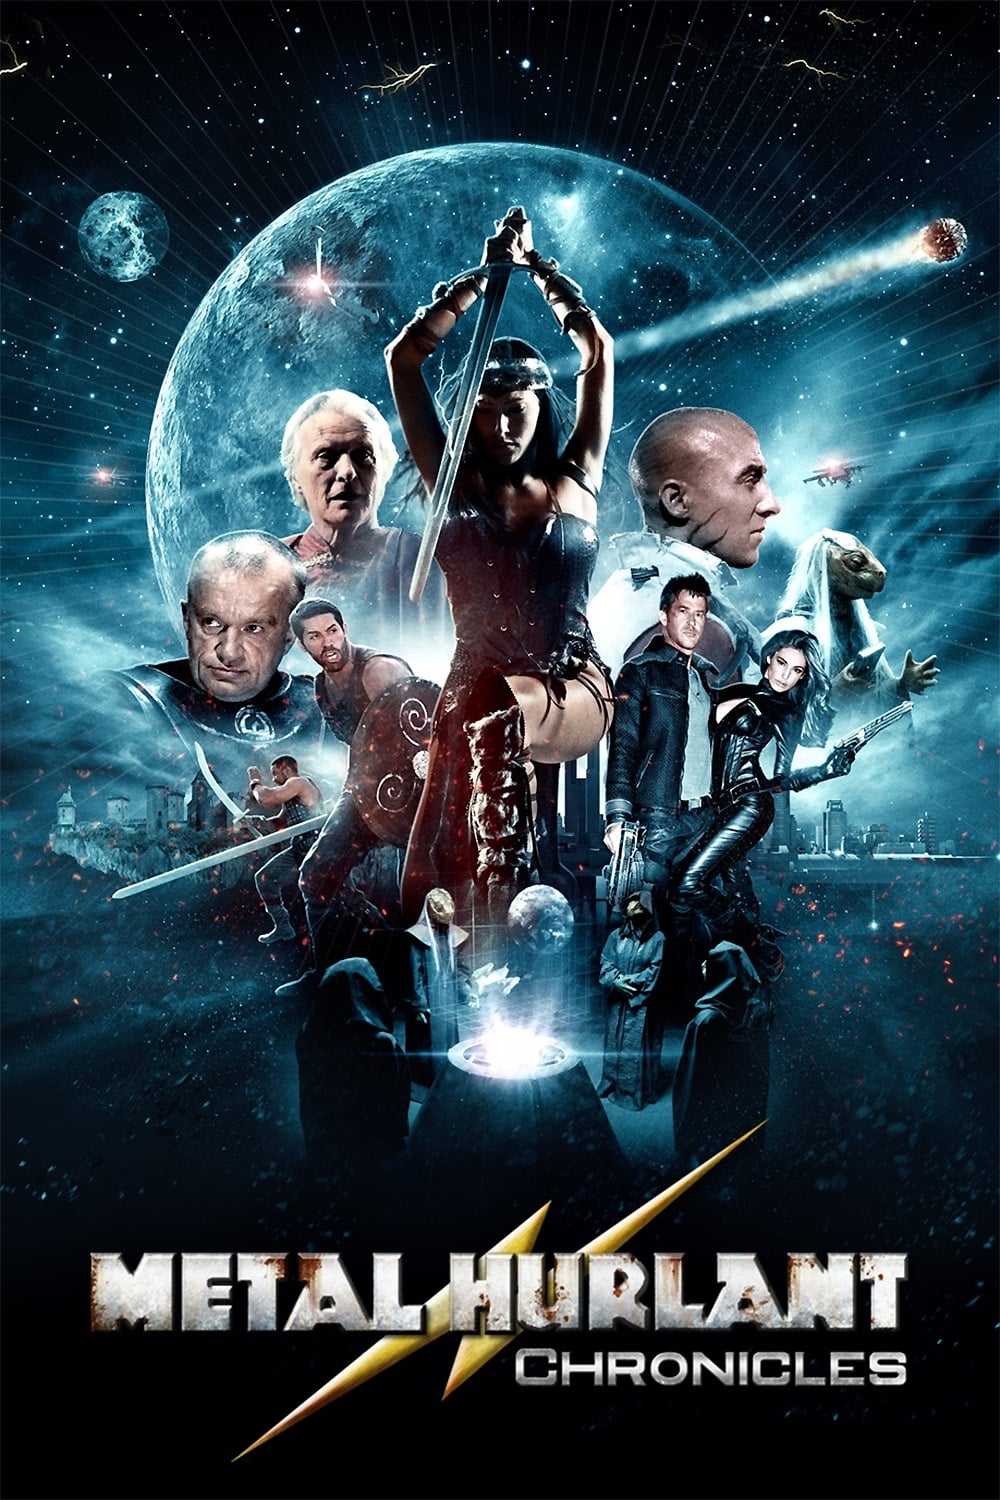 Metal Hurlant Chronicles TV Shows About Based On Graphic Novel